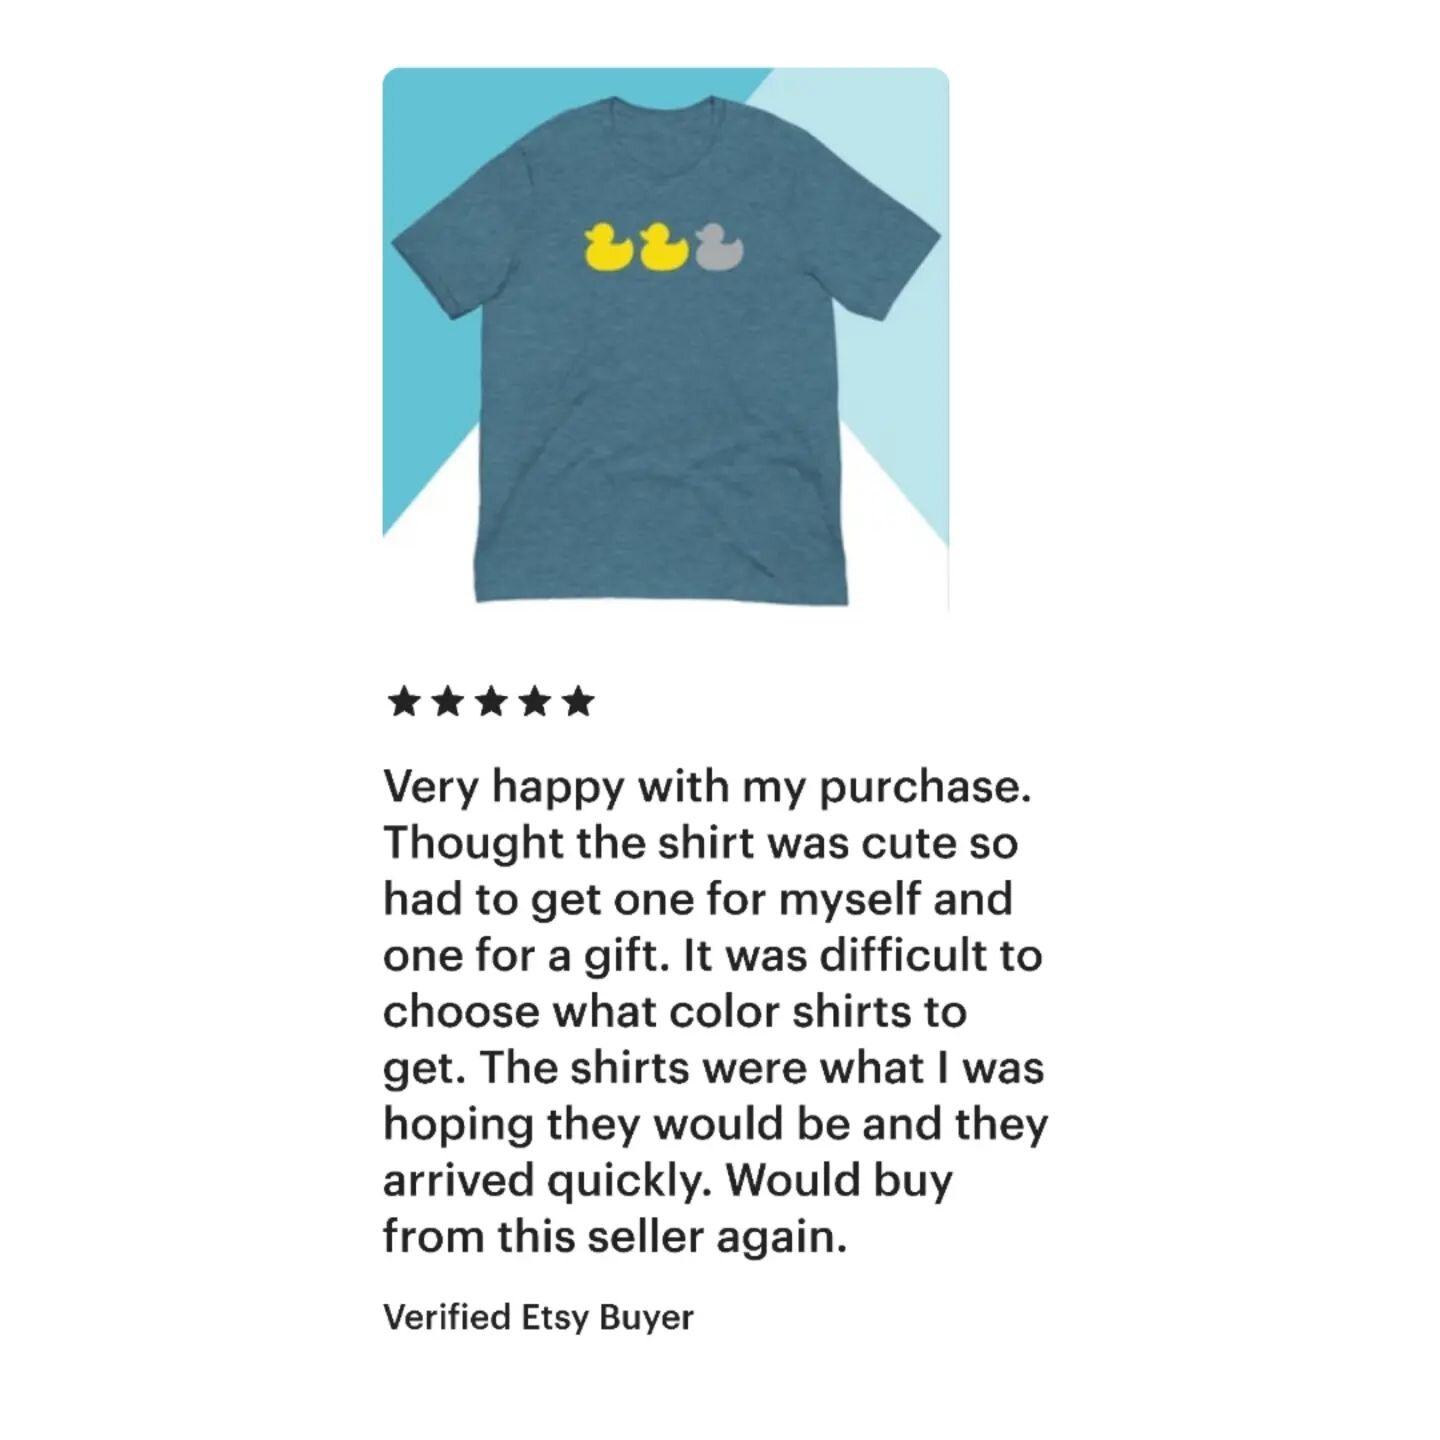 Exciting News! Another happy customer review! 🦉 ✨

I am thrilled to share this incredible feedback from one of my valued customers: &quot;Very happy with my purchase. Thought the shirt was cute so had to get one for myself and one for a gift. It was